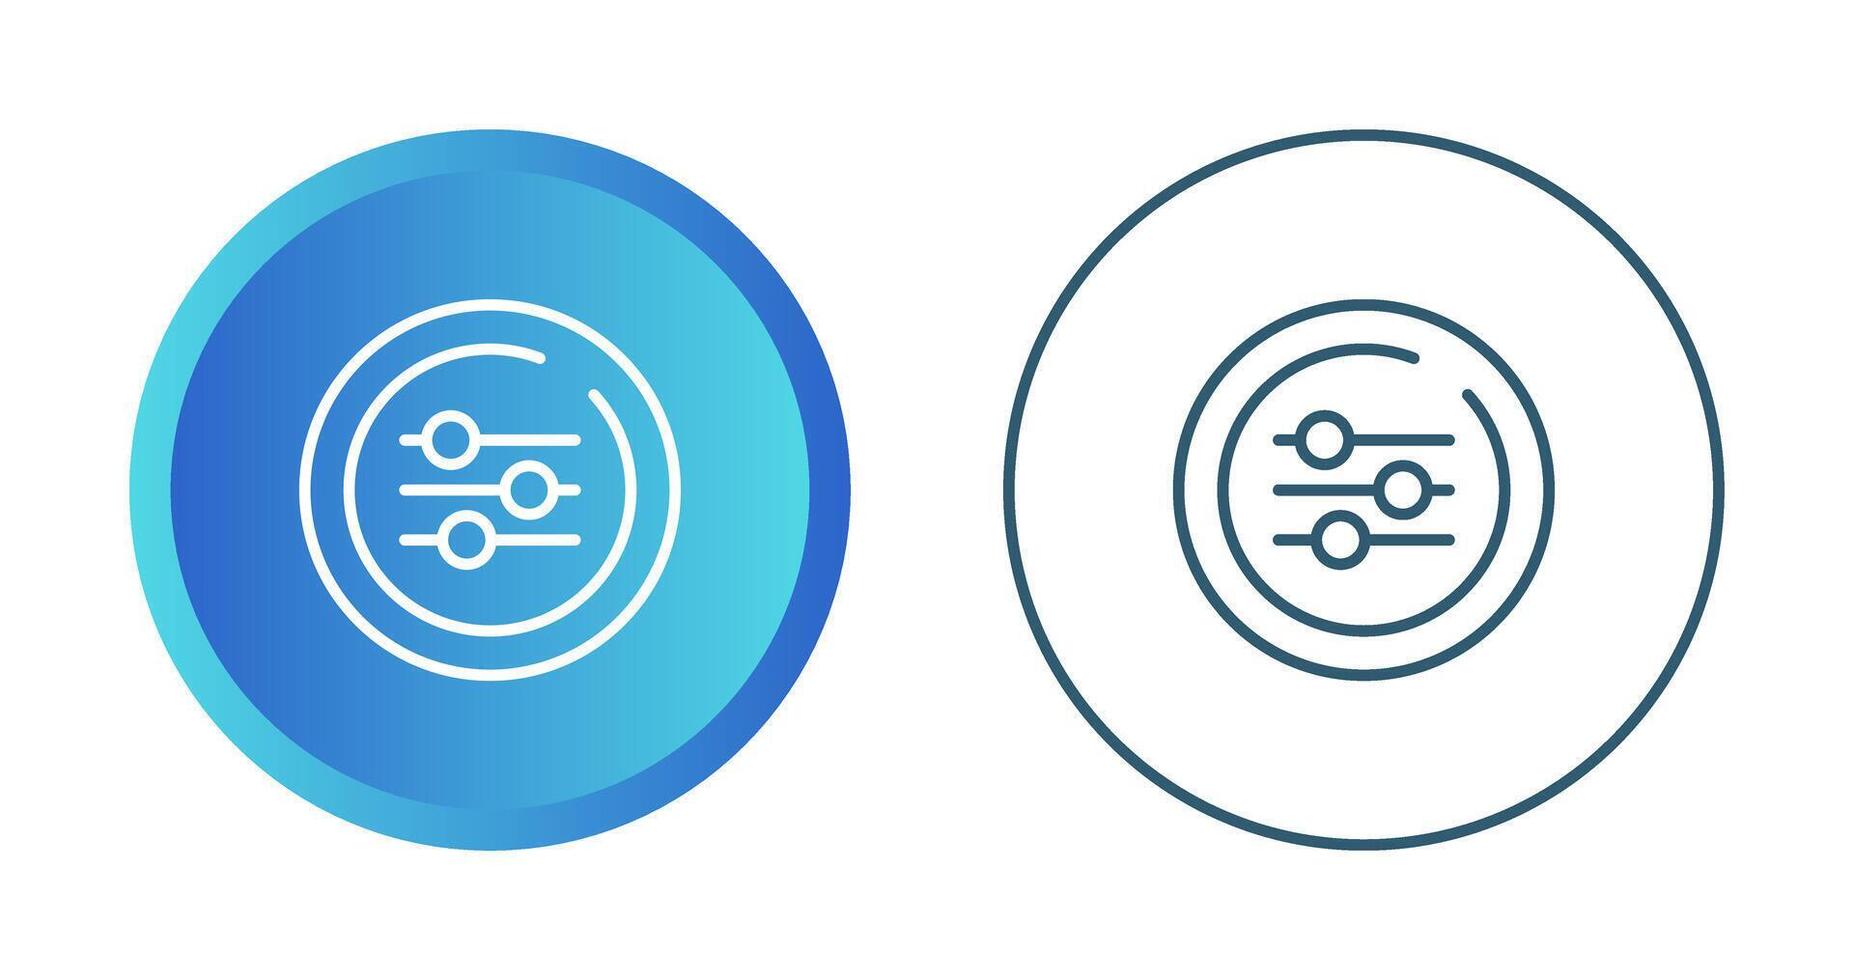 Equalizer Circle Vector Icon